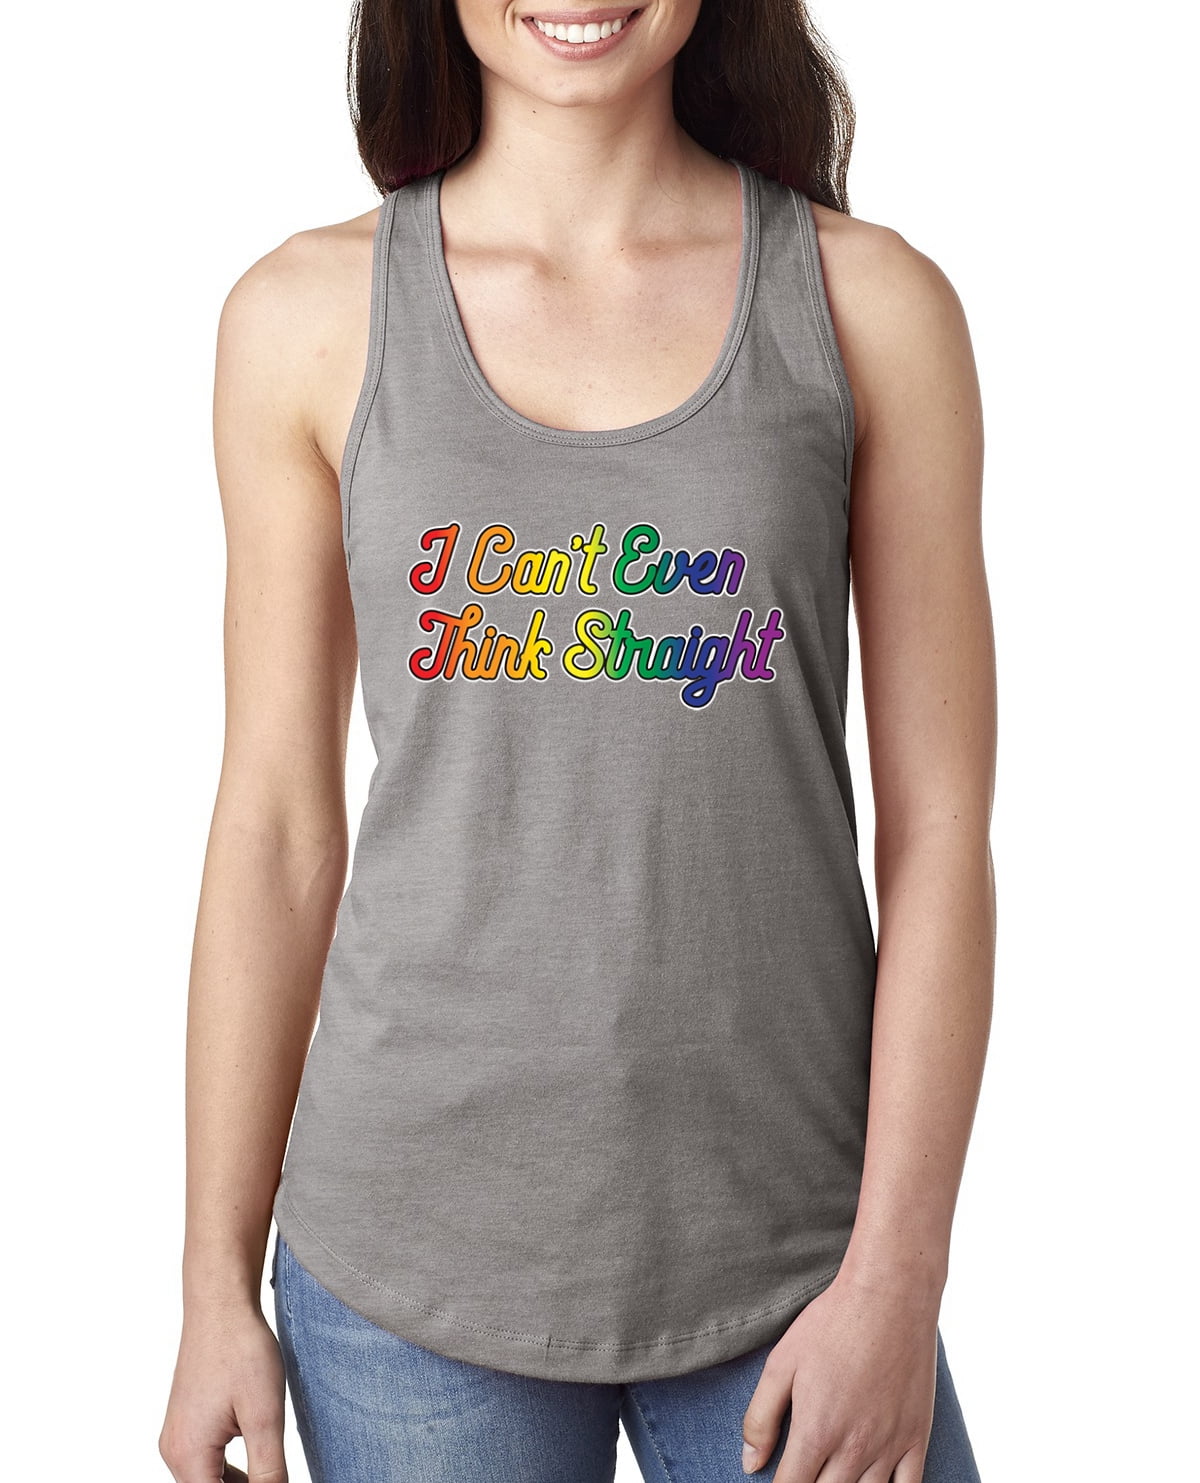 Tank Tops Sweatshirts Born This Gay Kitchen Aprons Gay Pride Month T-Shirts and More Hoodies